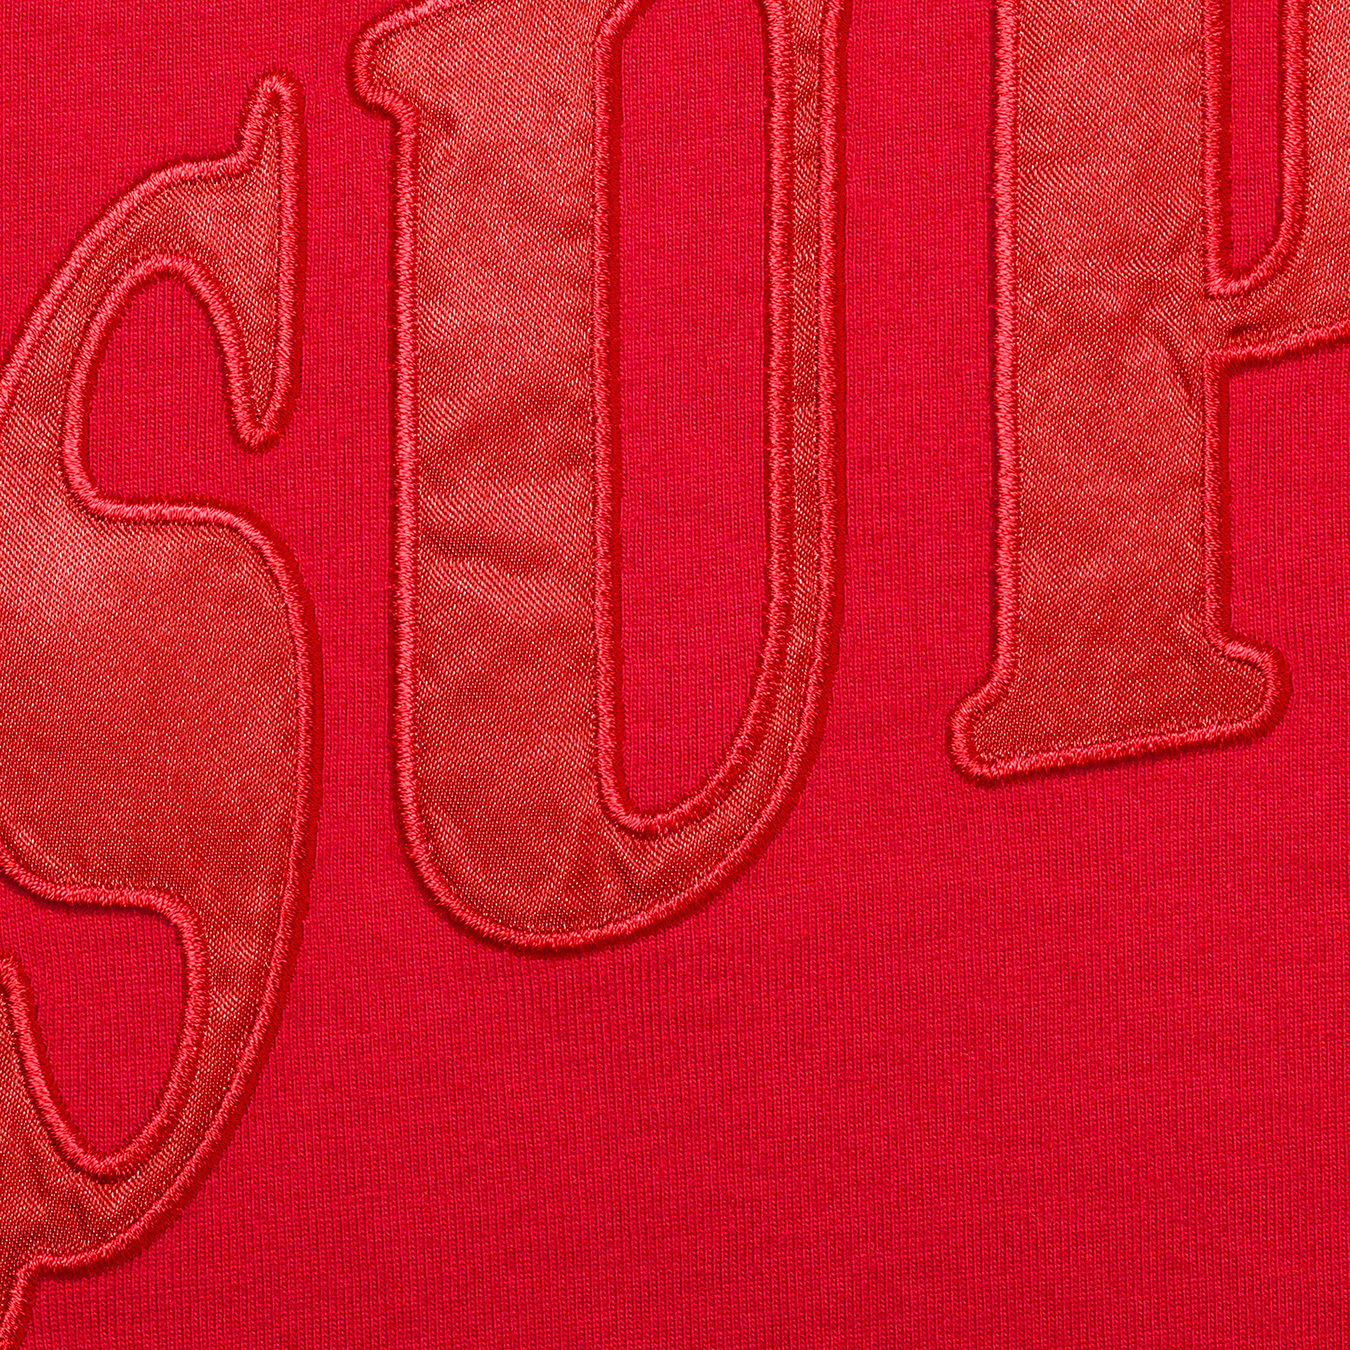 East West S S Top - fall winter 2021 - Supreme